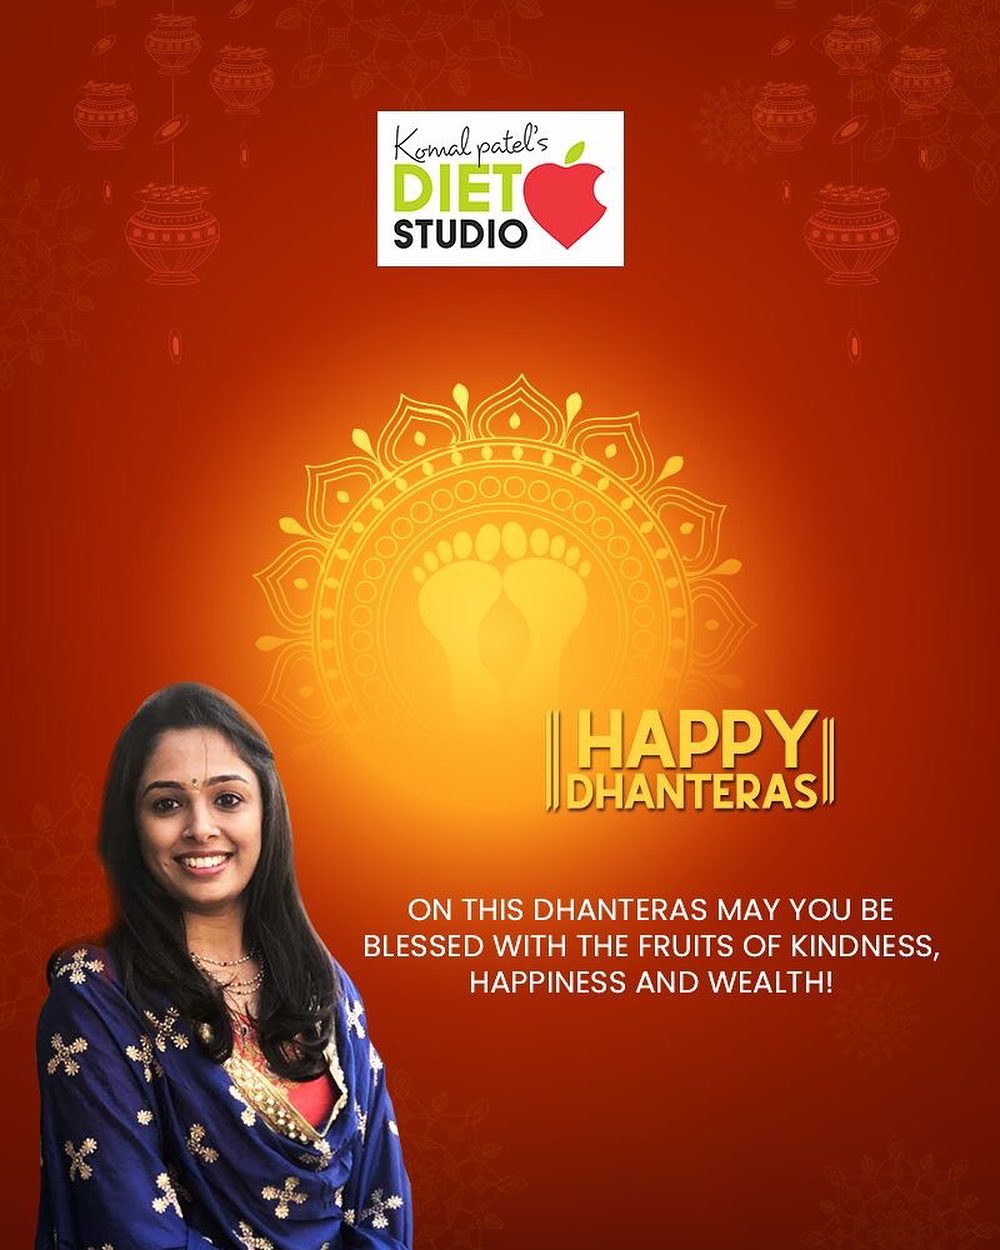 On this Dhanteras may you be blessed with the fruits of kindness, happiness and wealth!

#Dhanteras #Dhanteras2019 #ShubhDhanteras #IndianFestivals #DiwaliIsHere #Celebration #HappyDhanteras #FestiveSeason #Diwali2019 #komalpatel #diet #goodfood #eathealthy #goodhealth